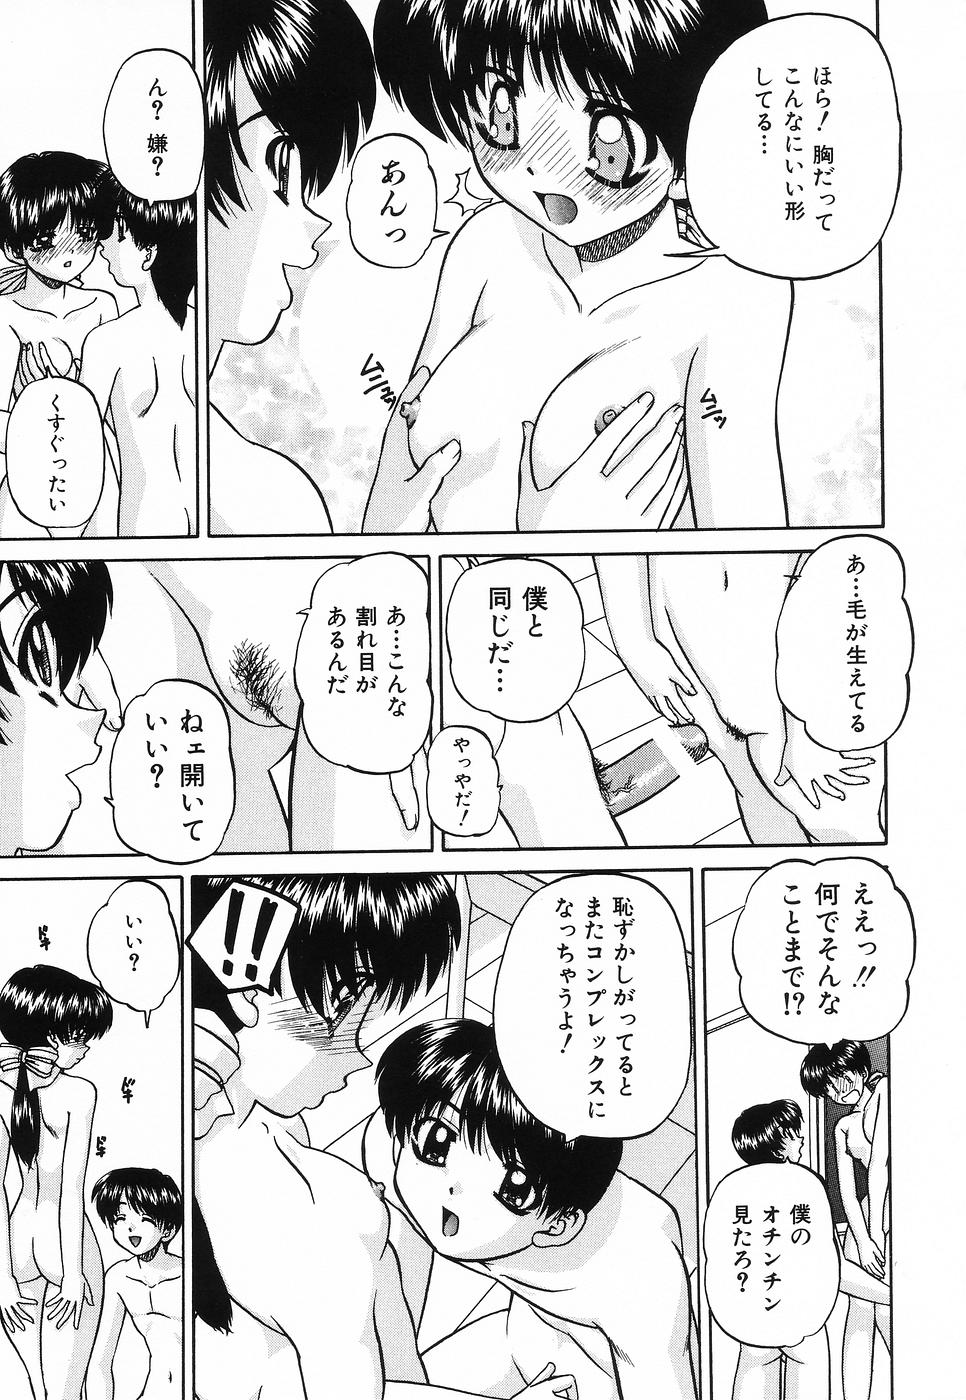 [Chunrouzan] Hime Hajime - First sexual intercourse in a New Year page 18 full